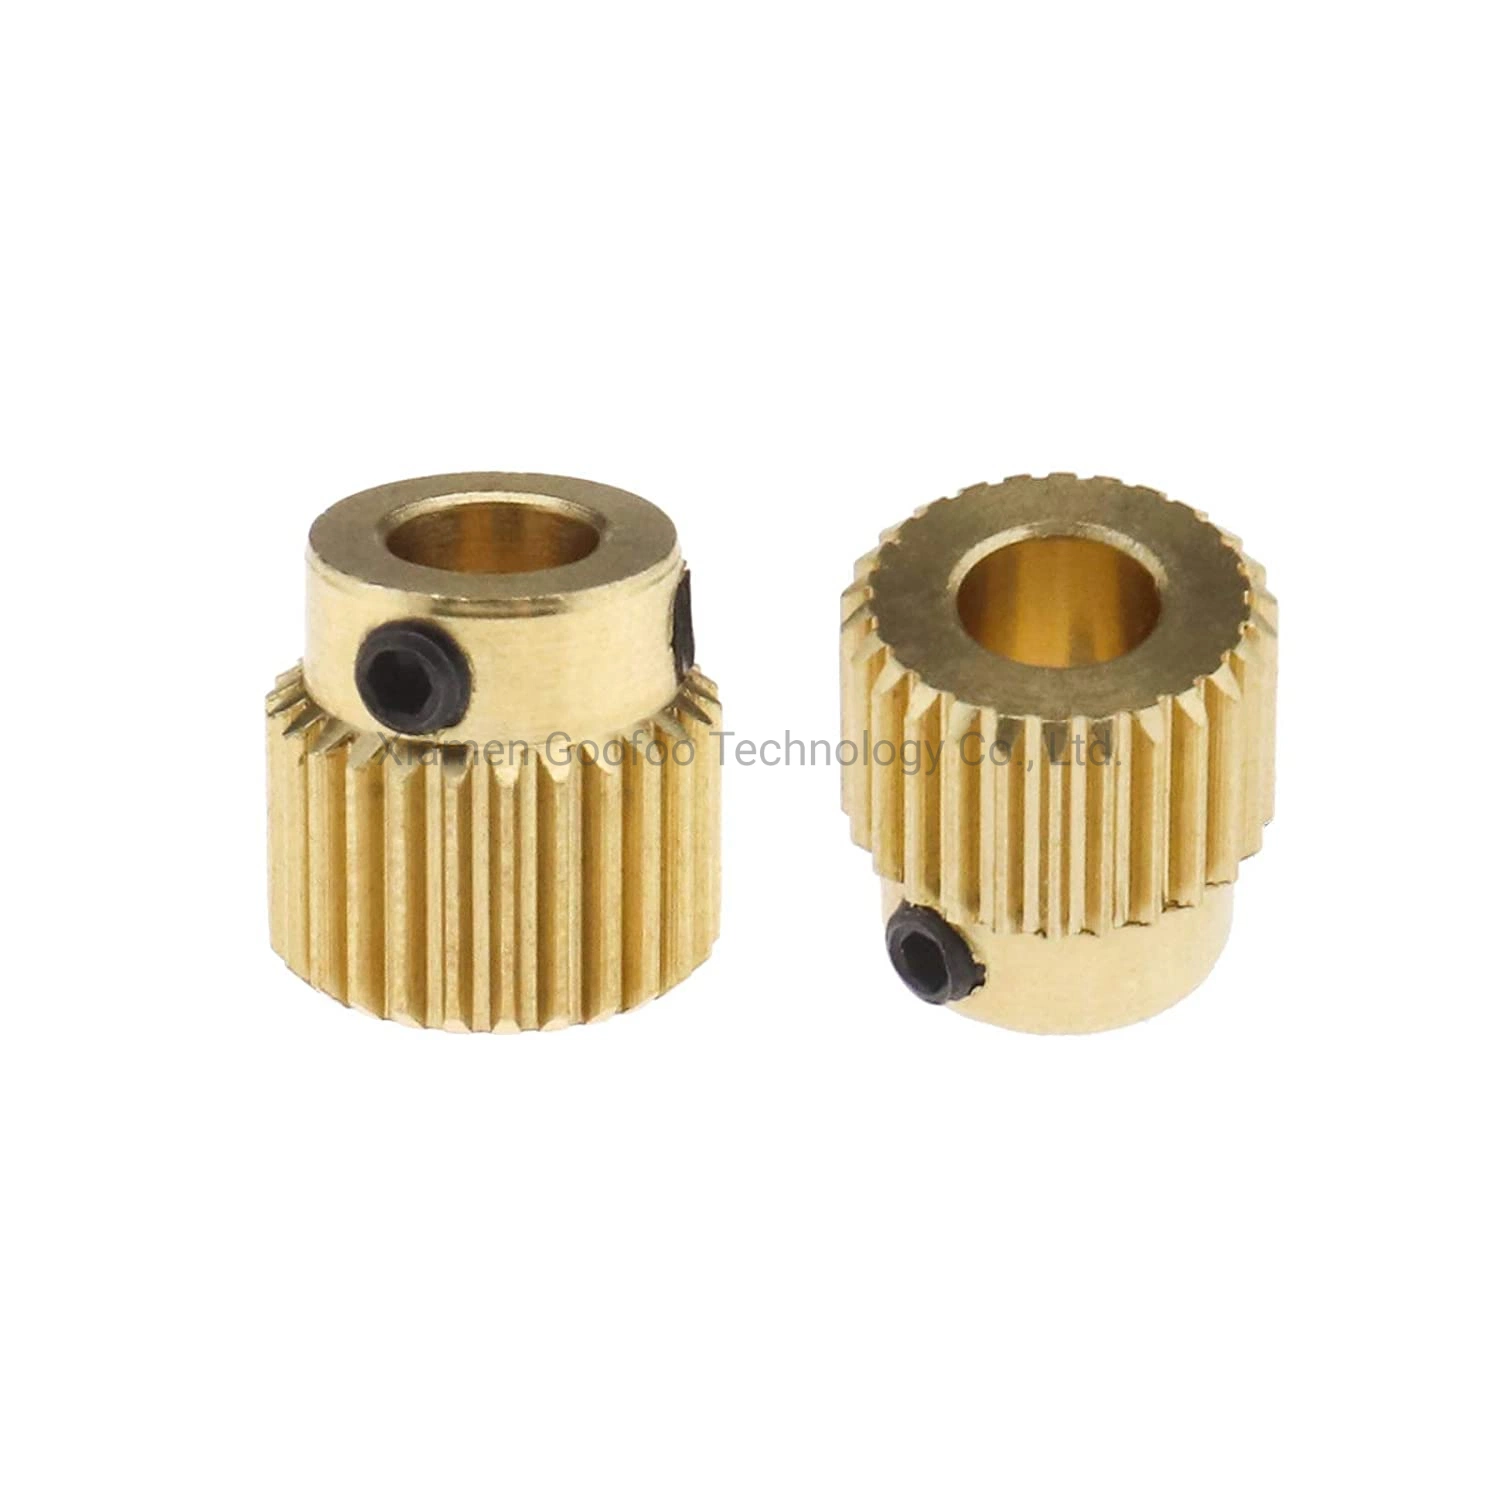 3D Printer Extrusion Wheel Brass Gear 40 Tooth Extruder Filaments for 3D Printing